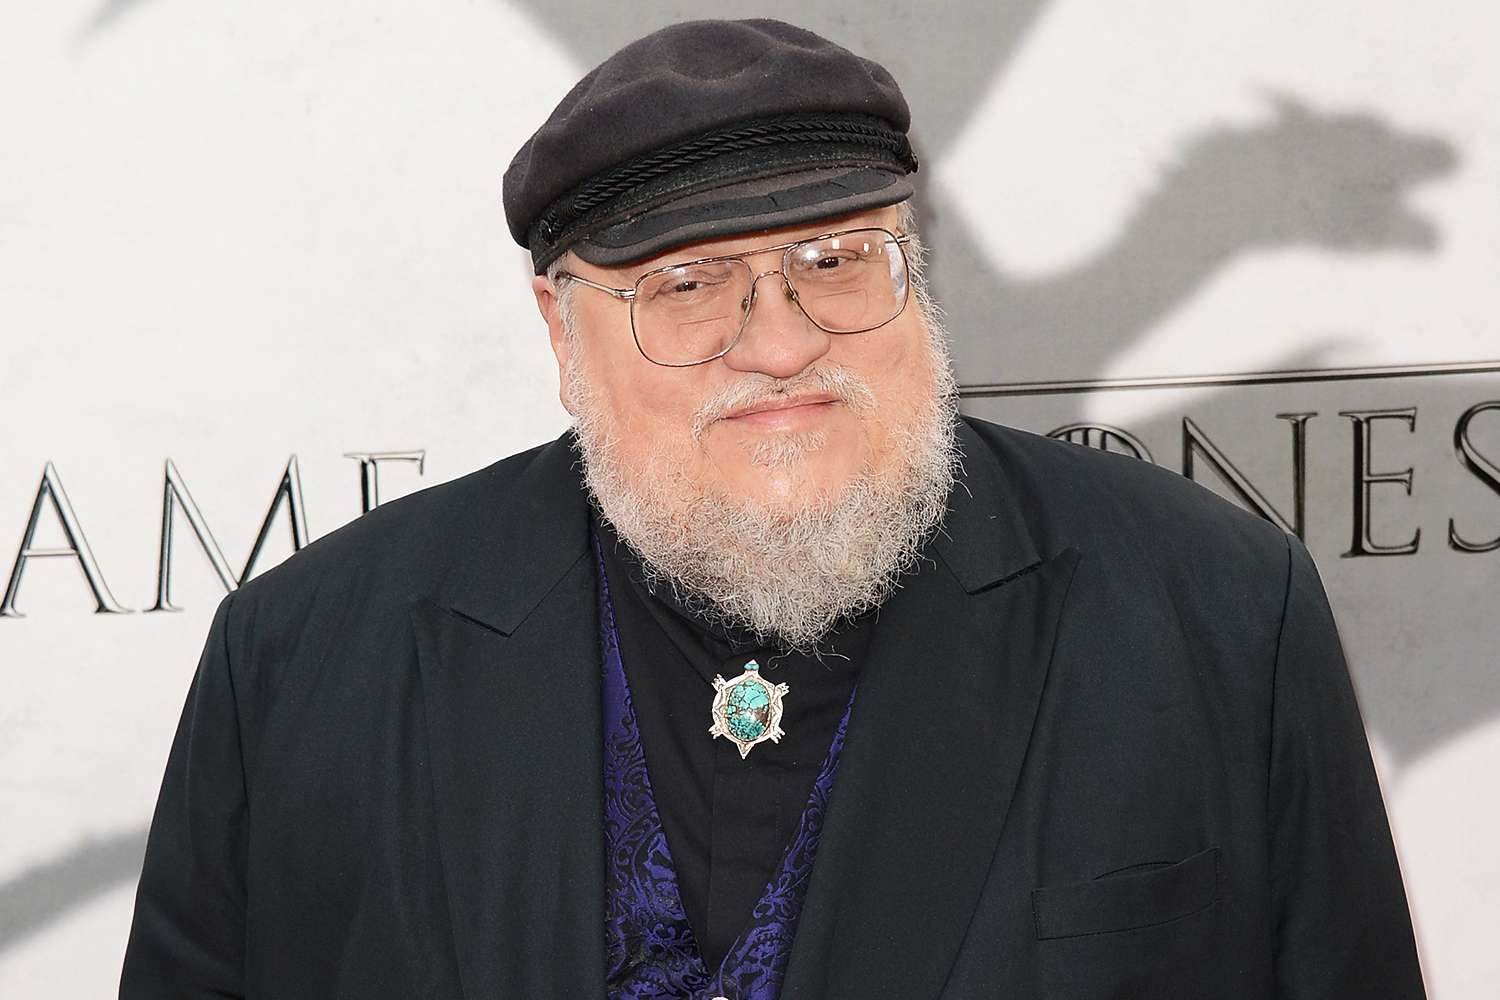 George R.R. Martin Criticizes Screen Adaptations of Books: 'They Never Make It Better'